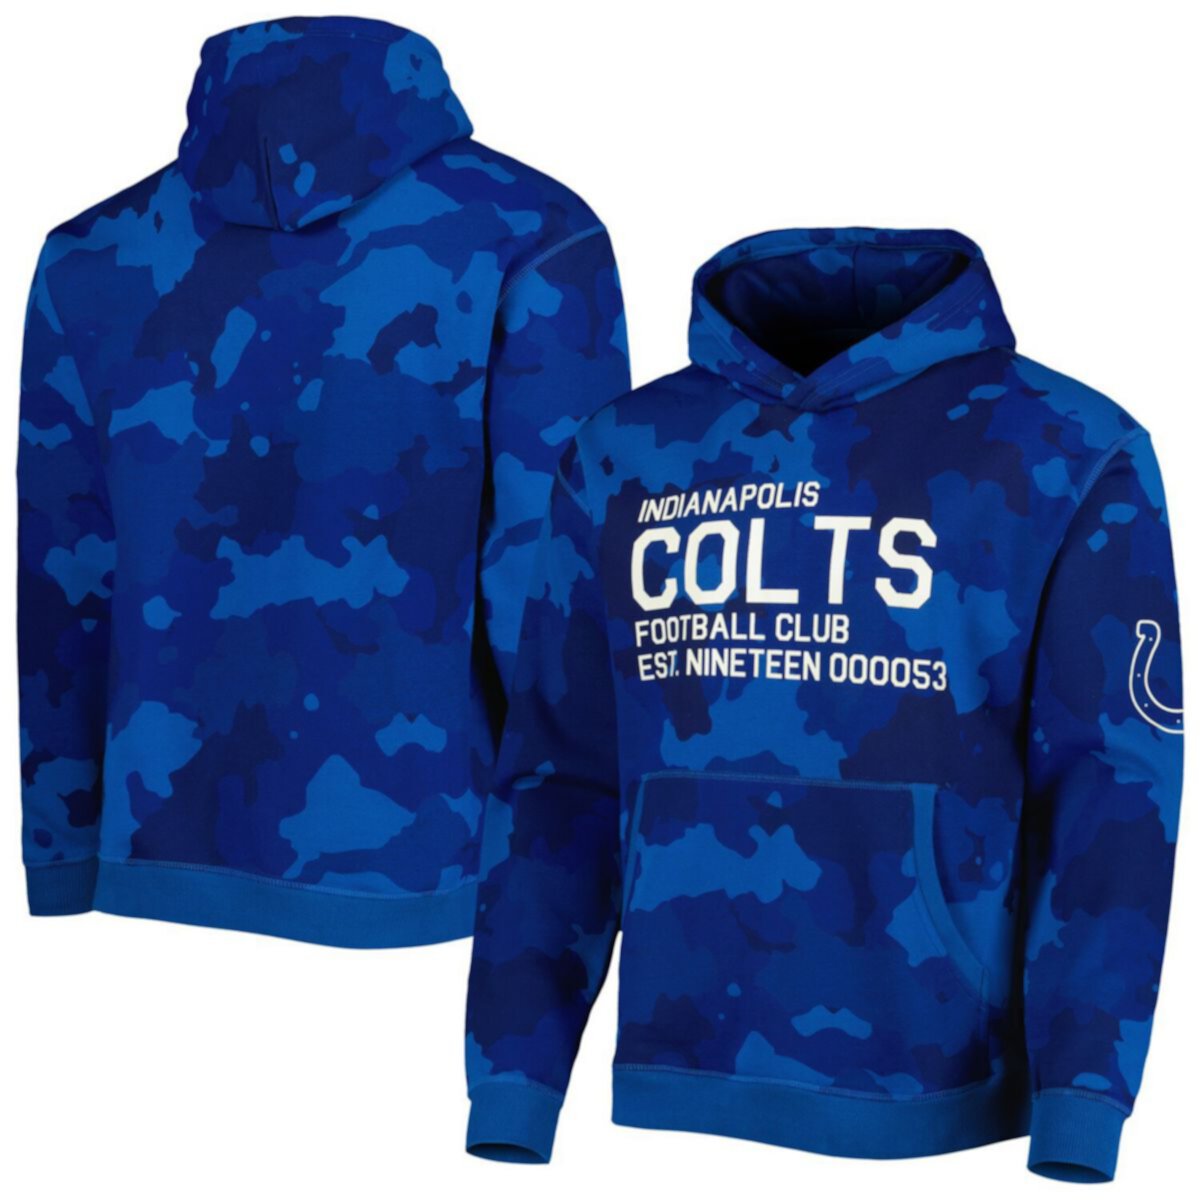 Мужская толстовка с капюшоном The Wild Collective Royal Indianapolis Colts Camo The Wild Collective